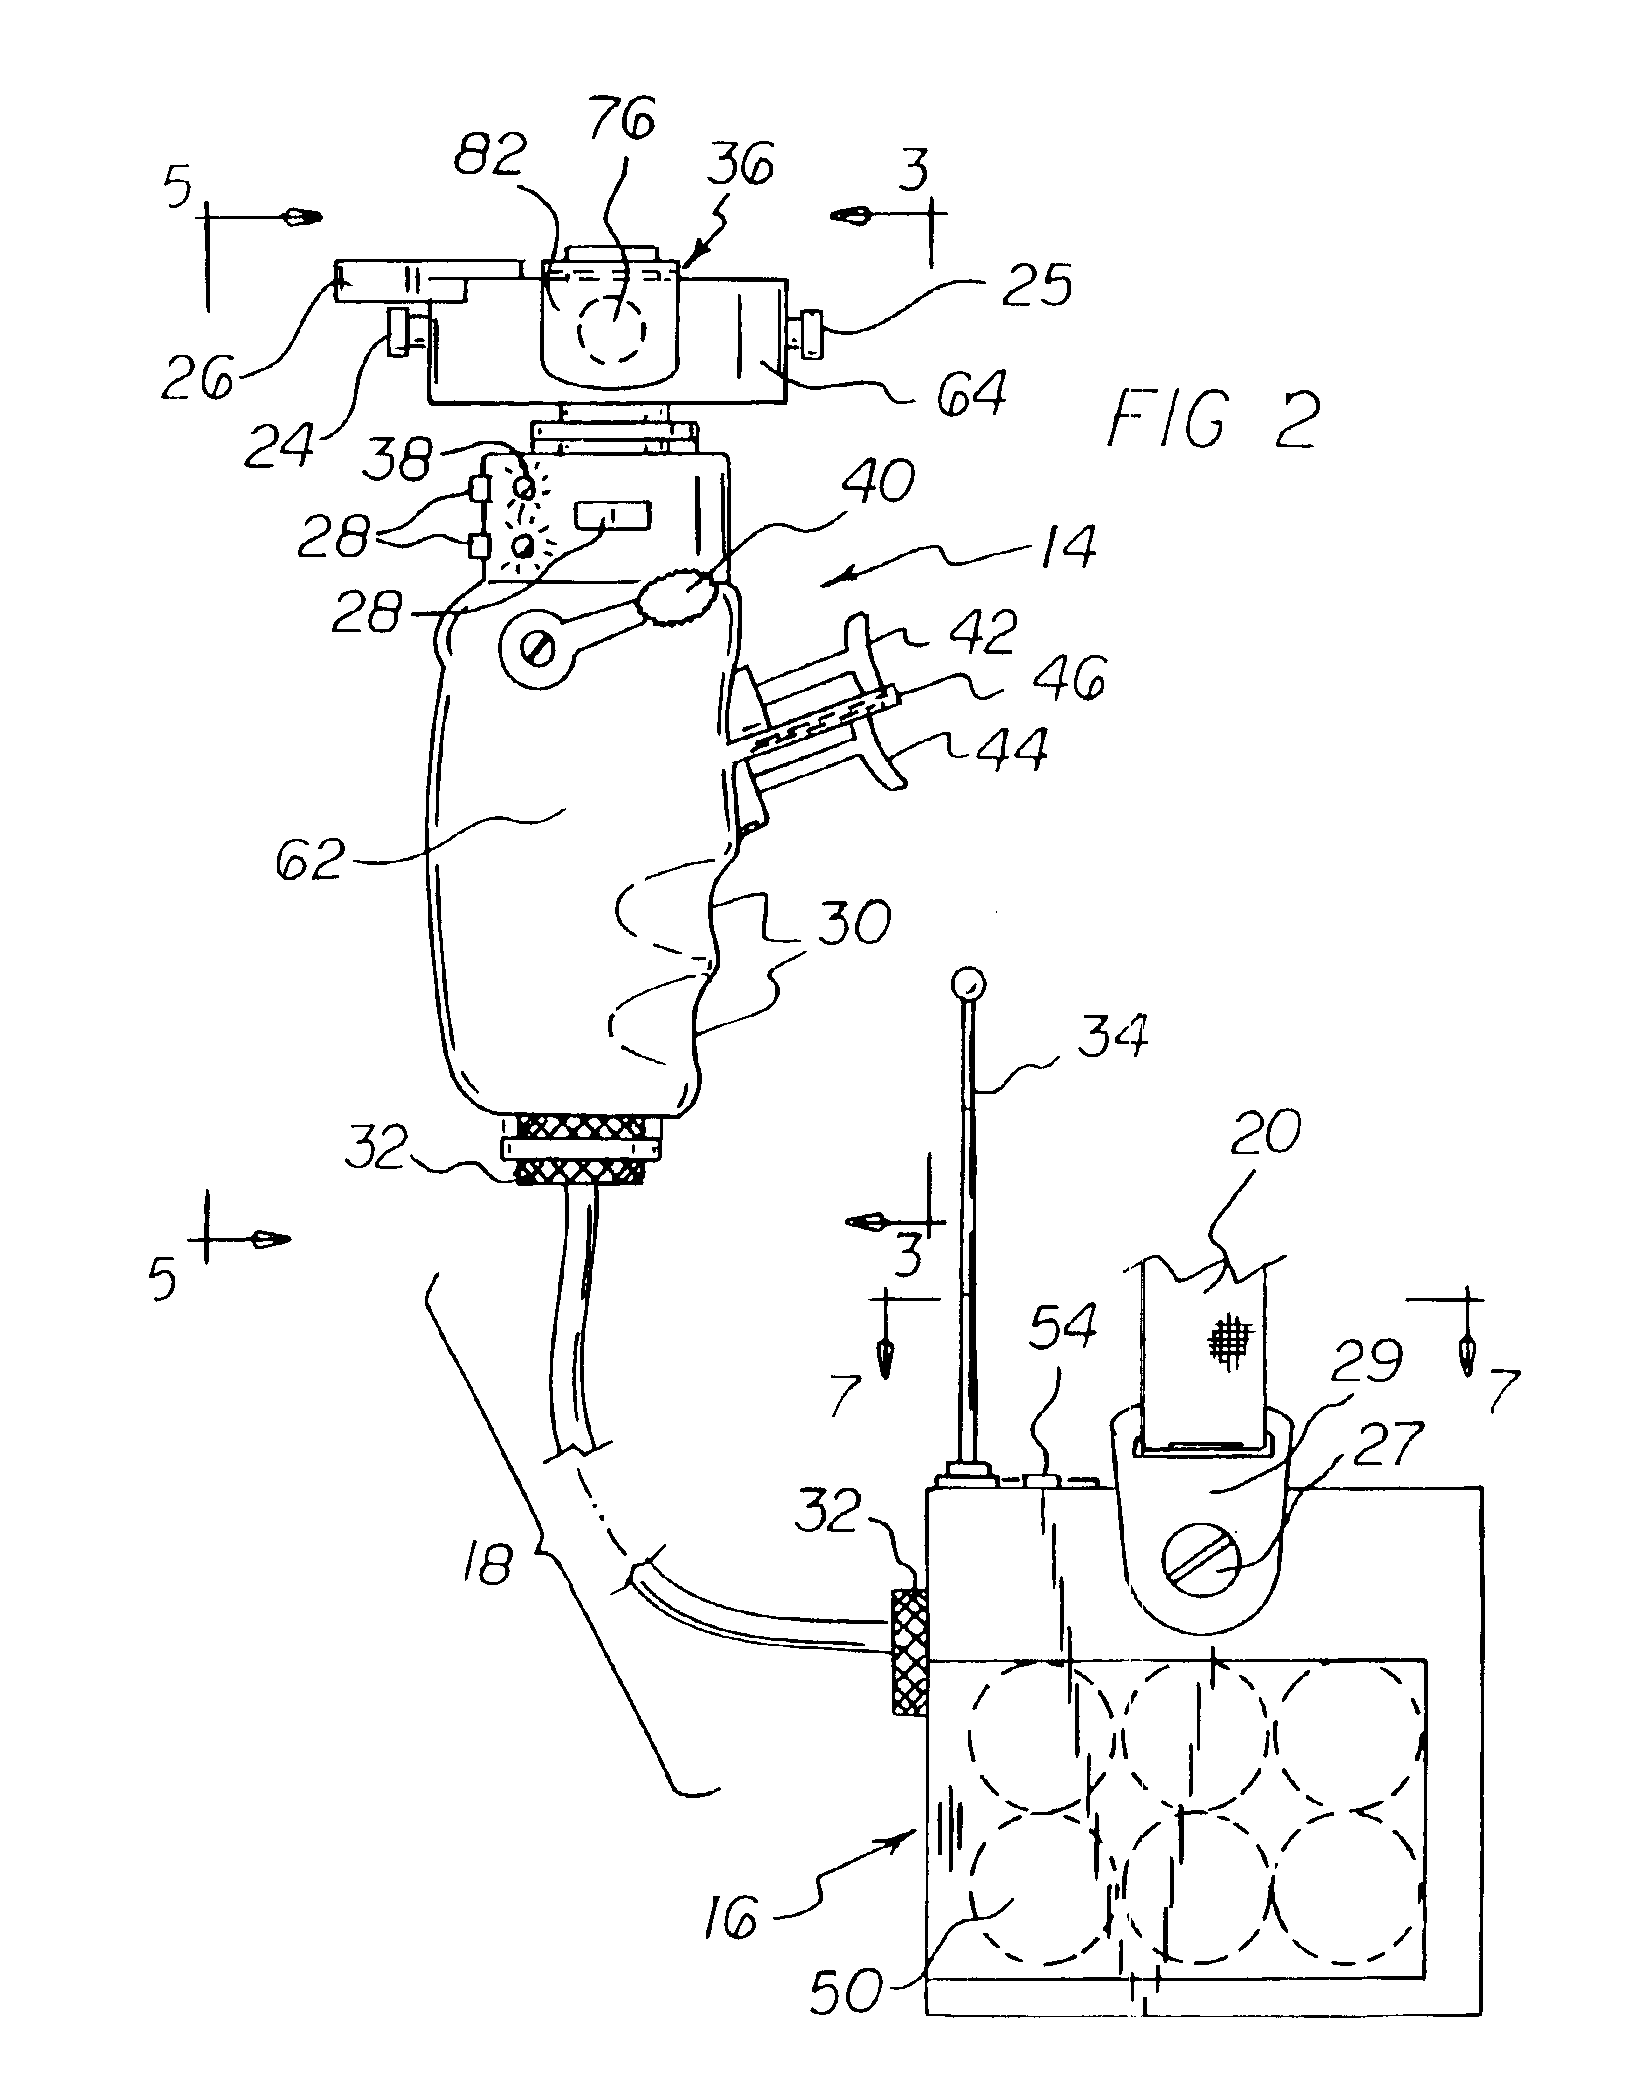 Remote control apparatus with user-operated clutch controls